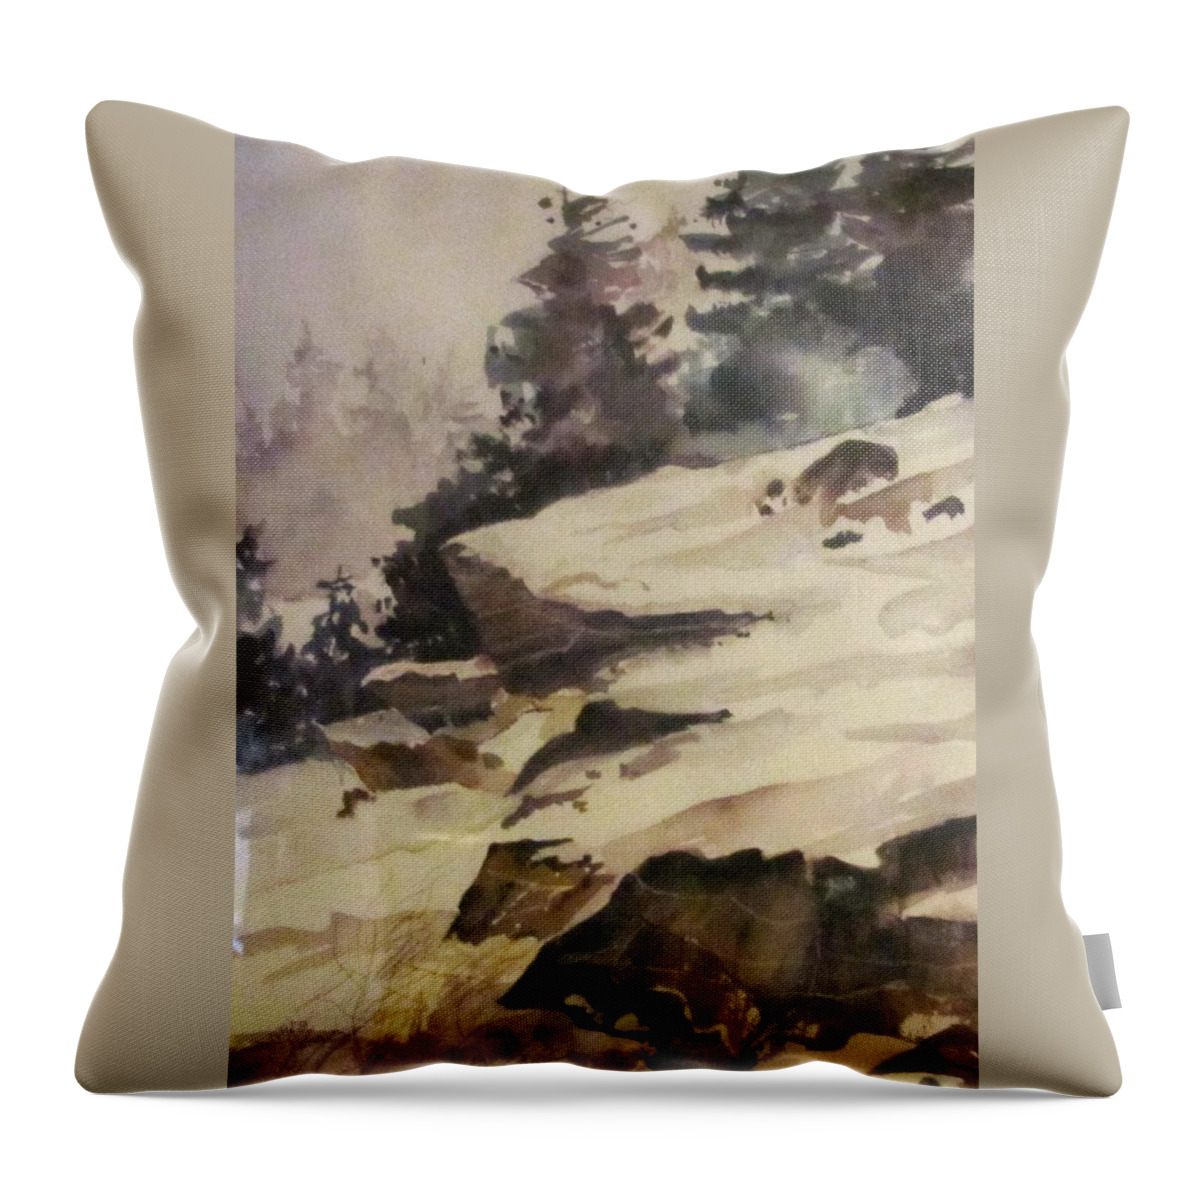 Watercolor Throw Pillow featuring the painting Icy Crest by Carole Johnson